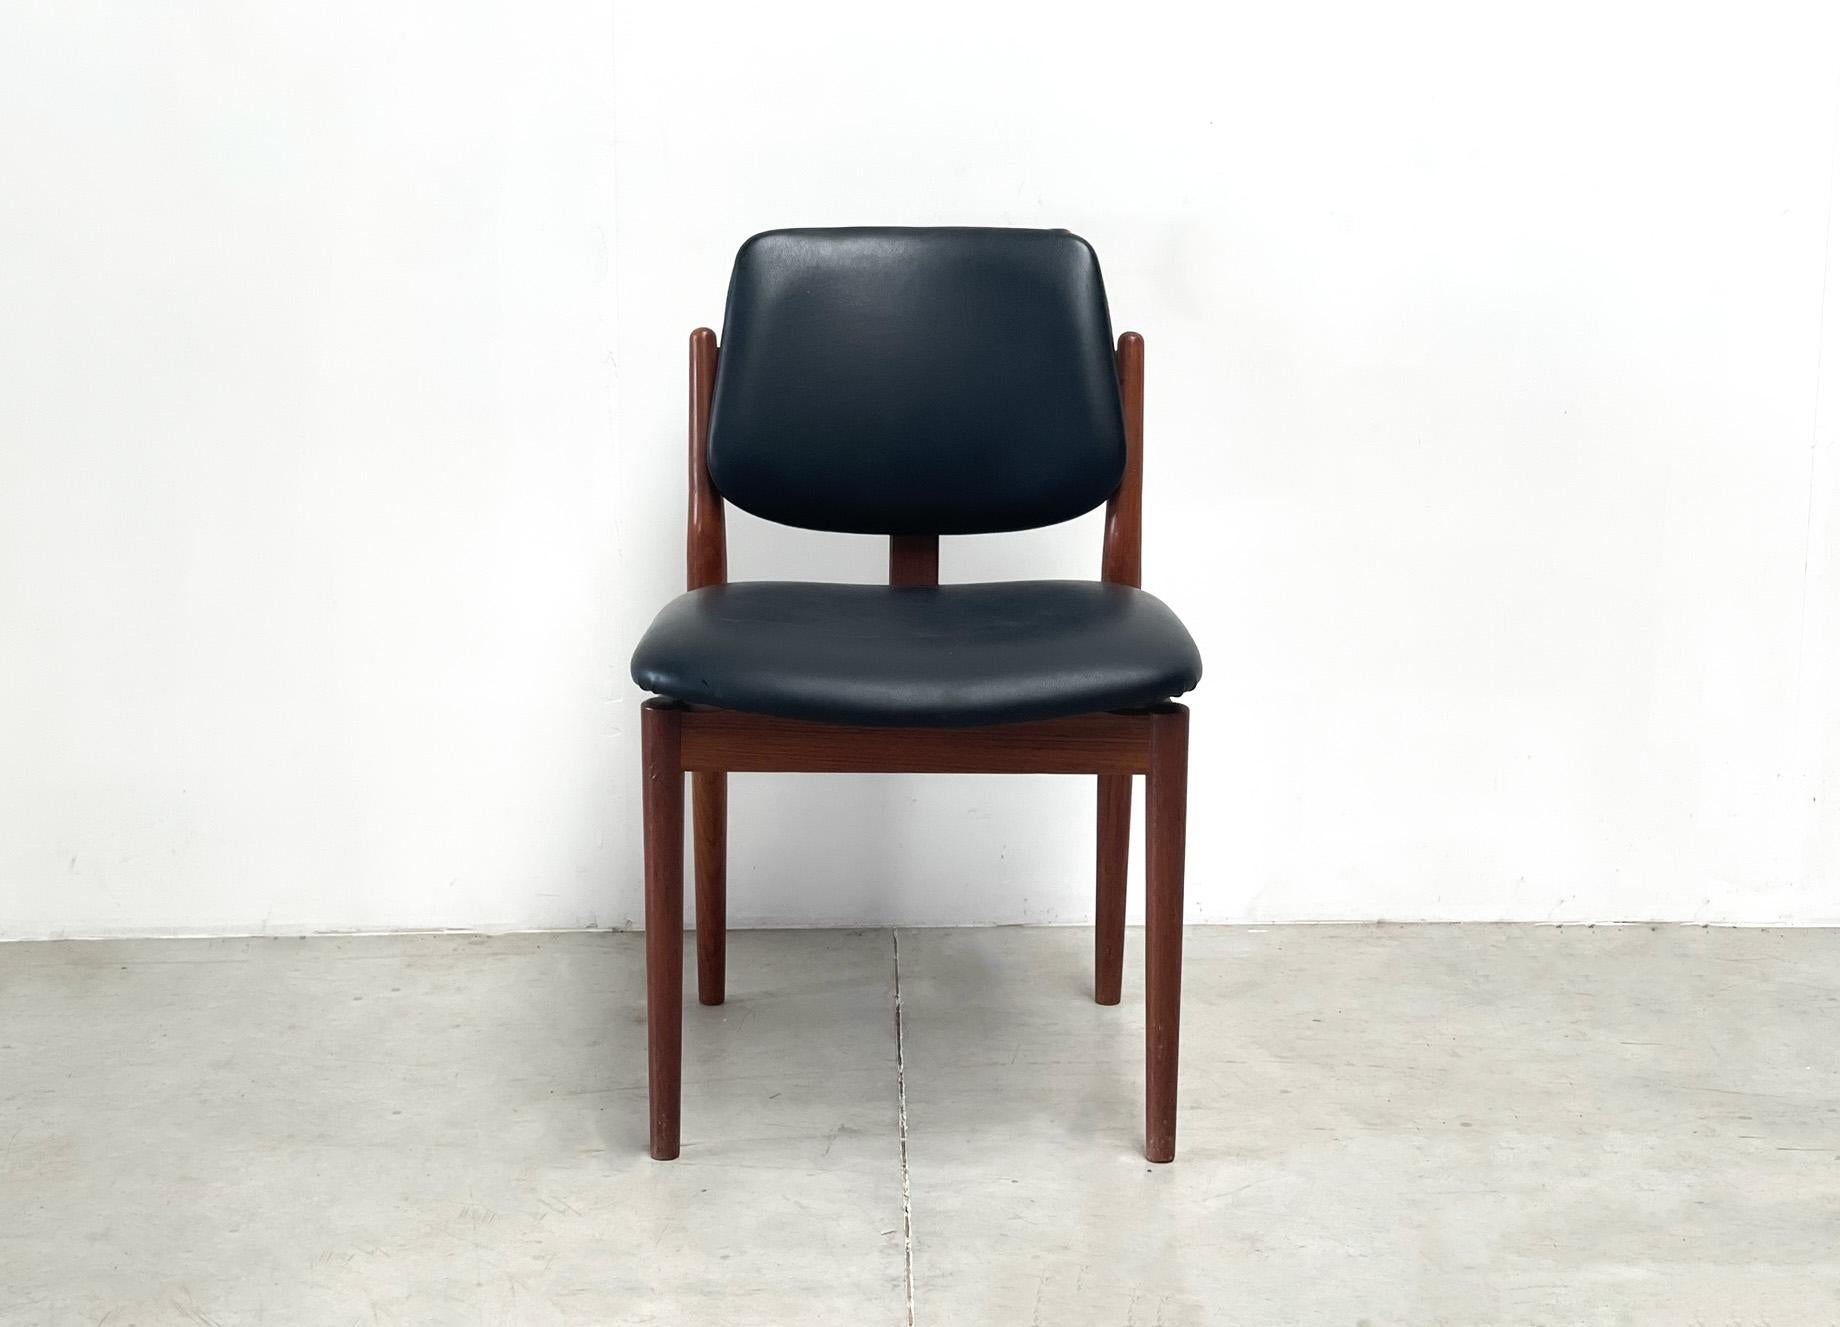 What an Elegant Chair. This chair was designed by one of Denmark's most famous designers. Arne Vodder, who designed it for manufacturer Sibast. Sibast is a respected manufacturer and is known for making Danish furniture of the highest quality. Over